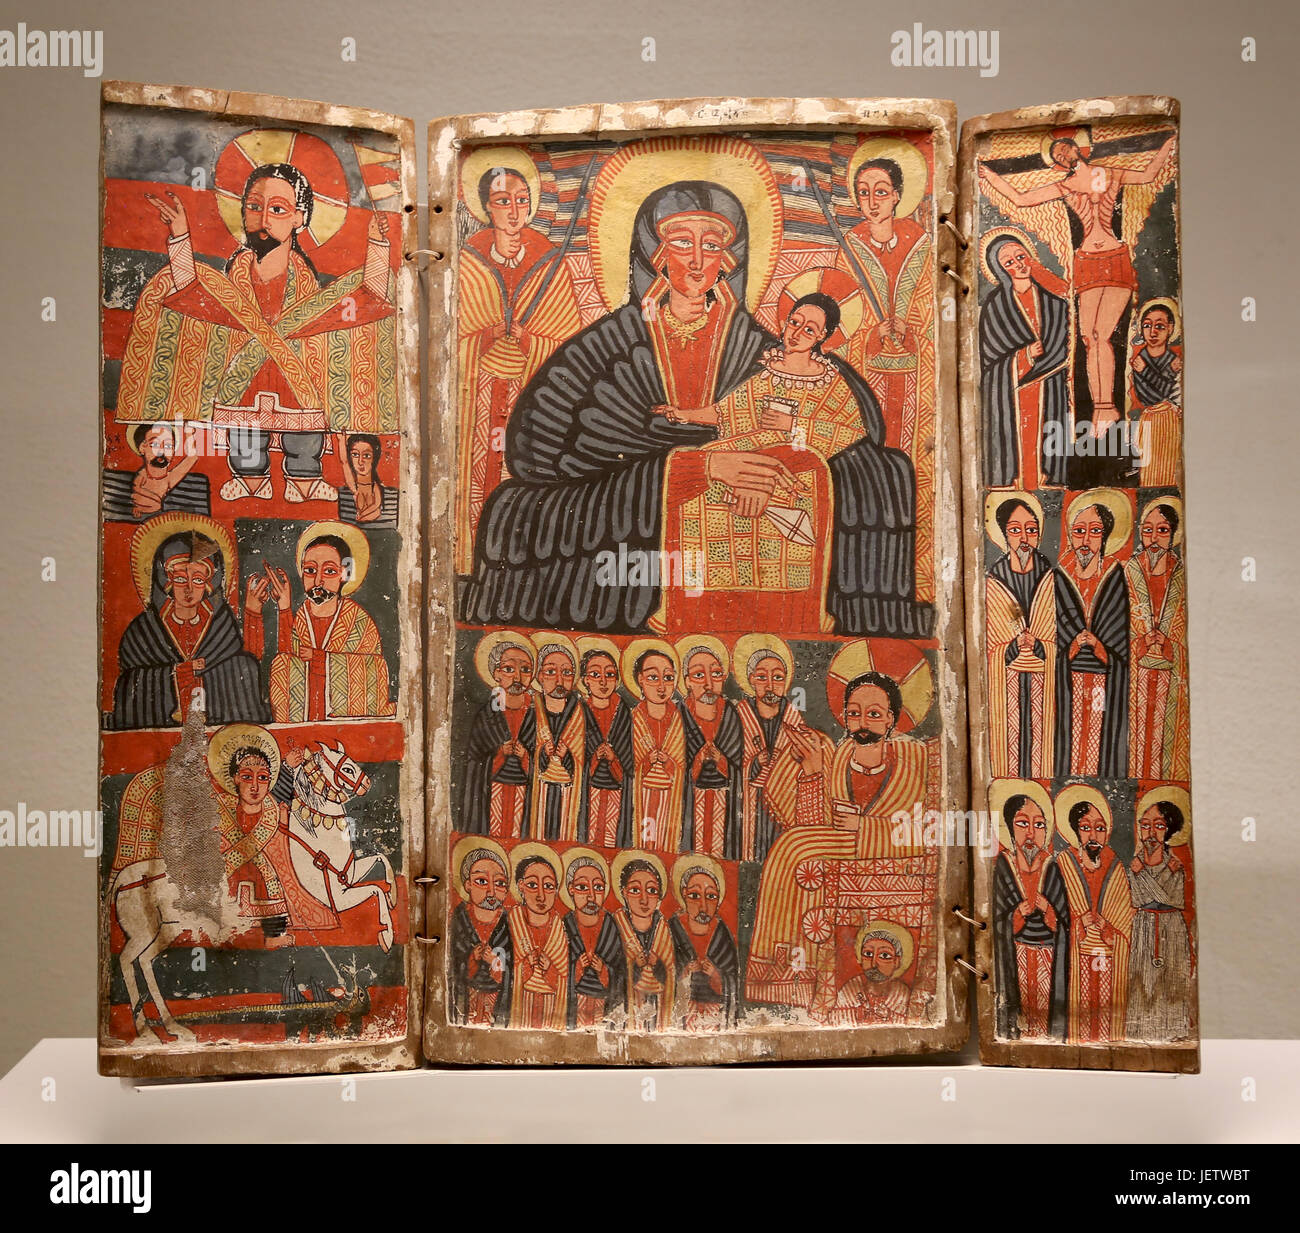 Triptych with Mary, scenes of the life of Jesus and Saints. Ethiopian Christian art. End of 17th Century. Paint on wood. First Gondarene Period. Stock Photo